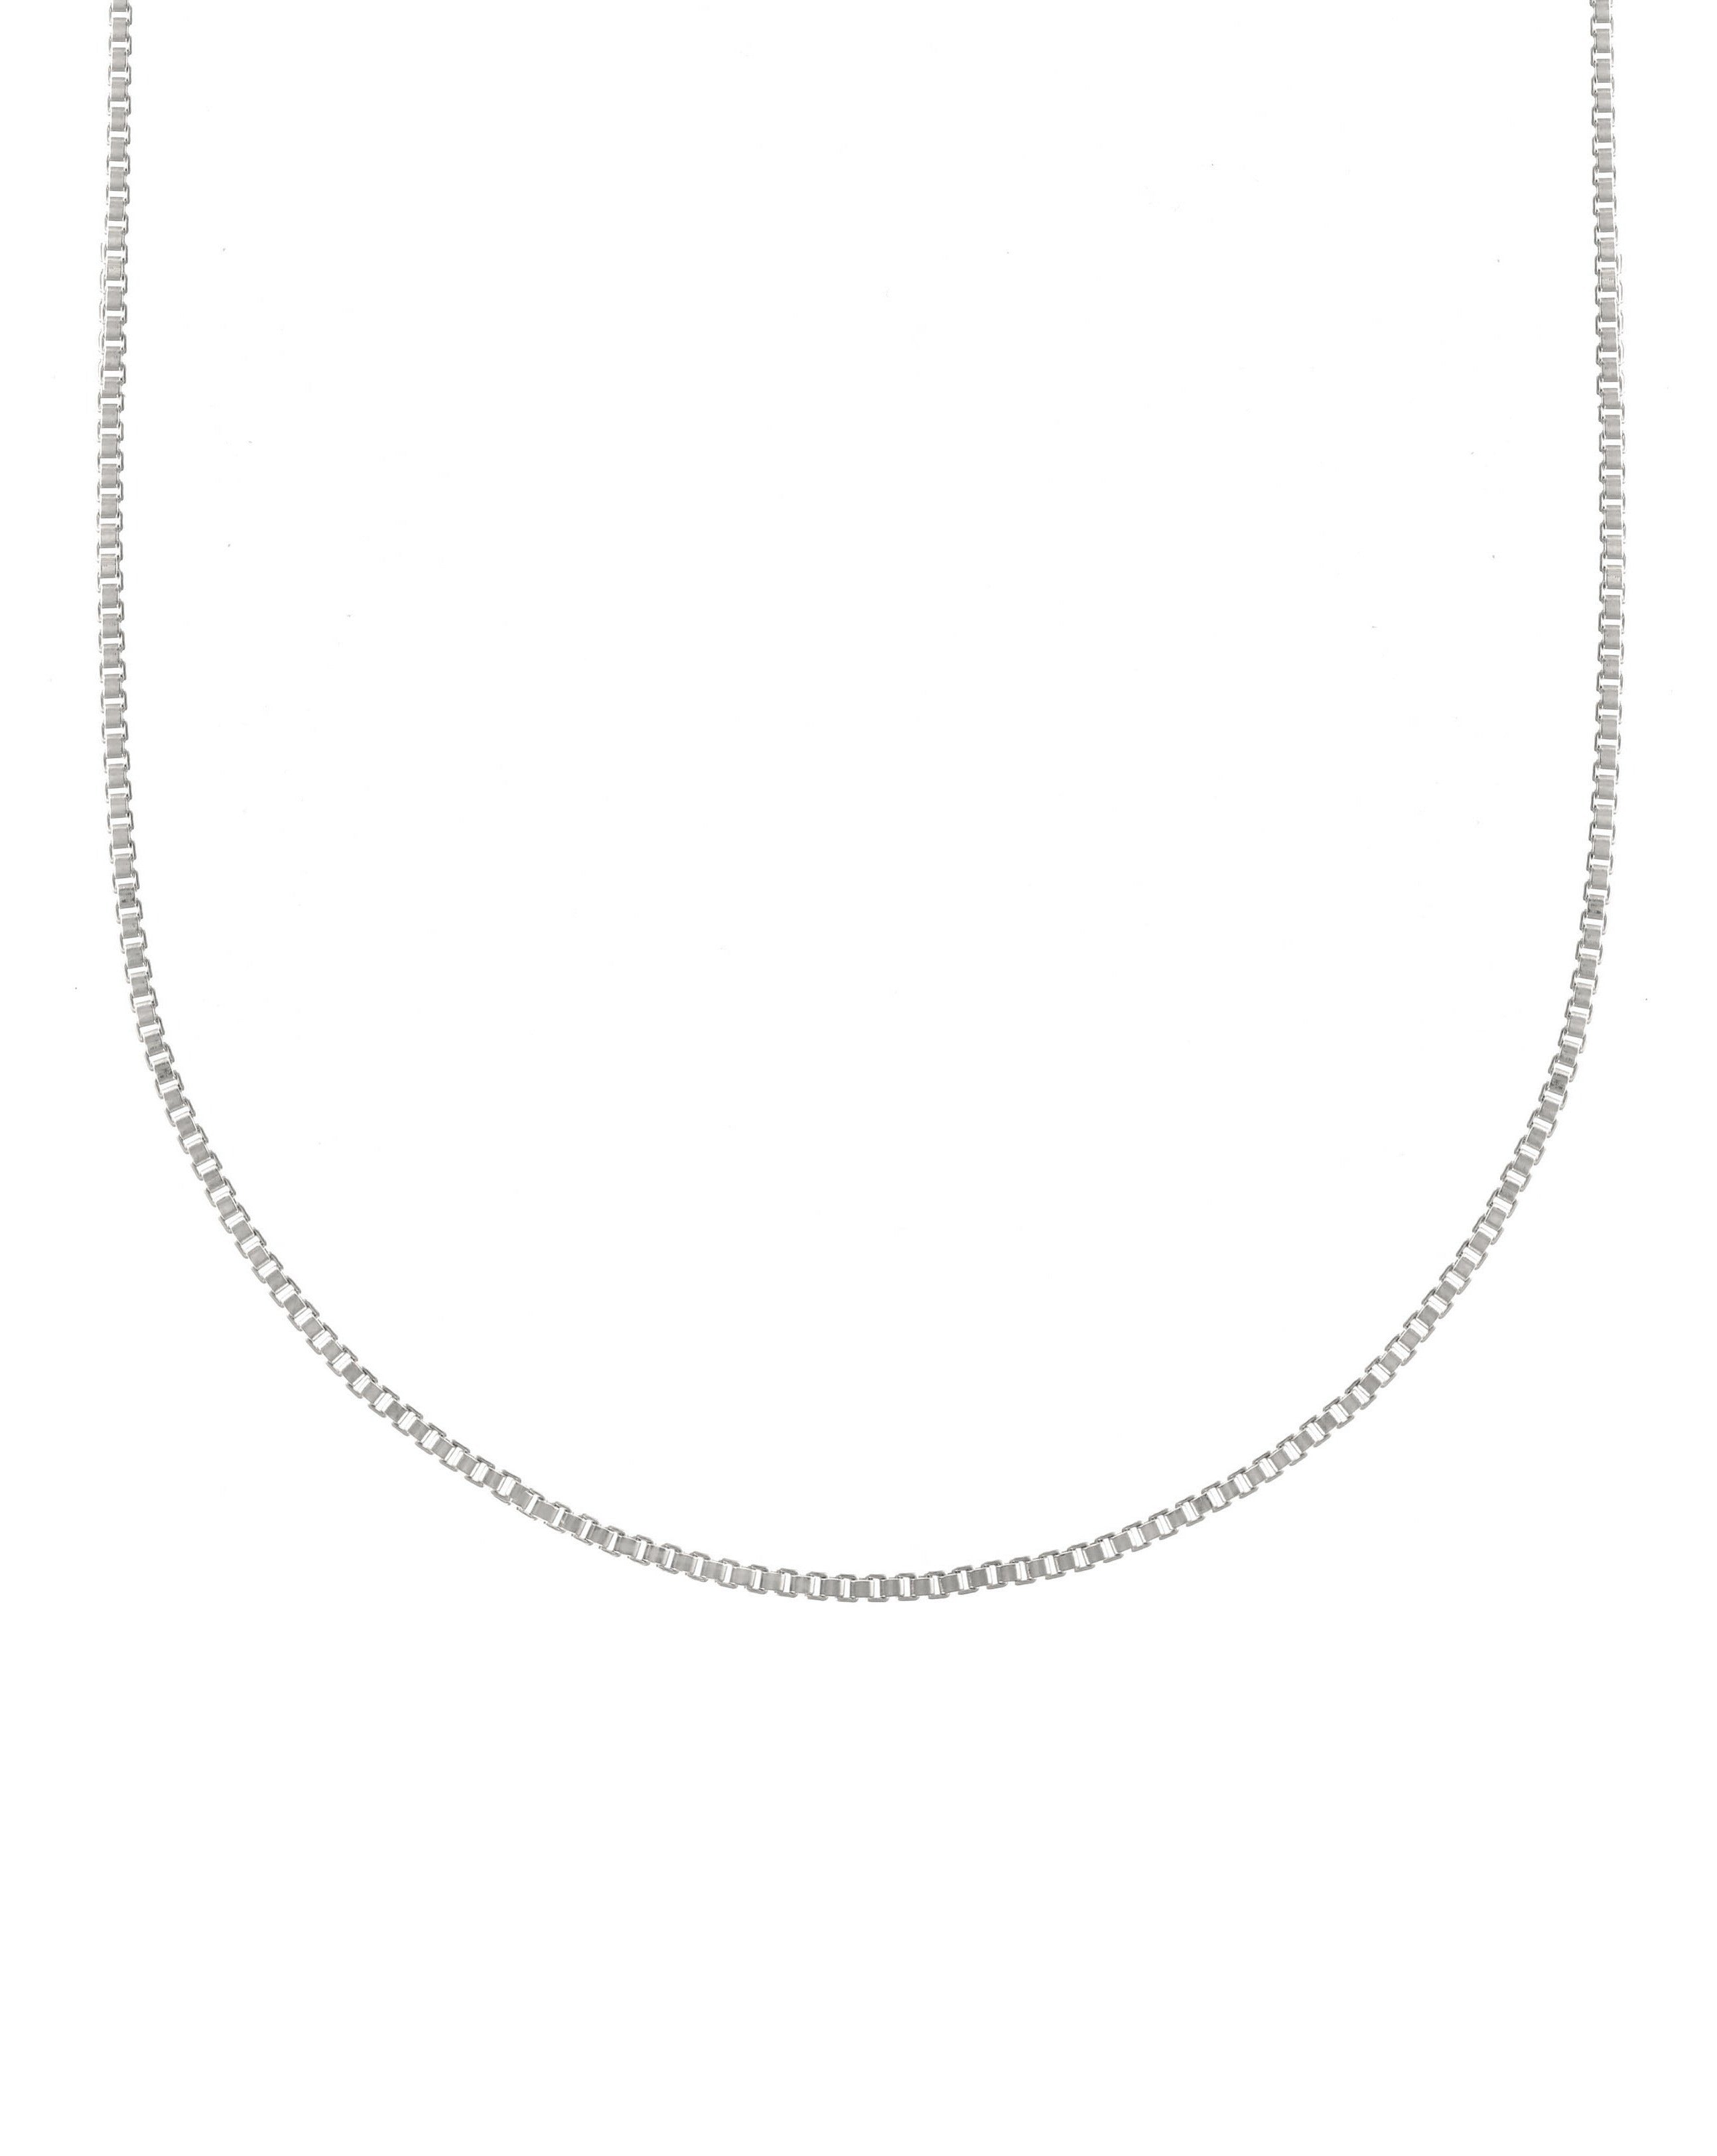 Kita Necklace by KOZAKH. A 14 to 16 inch adjustable length, 3mm thick box chain necklace in Sterling Silver.